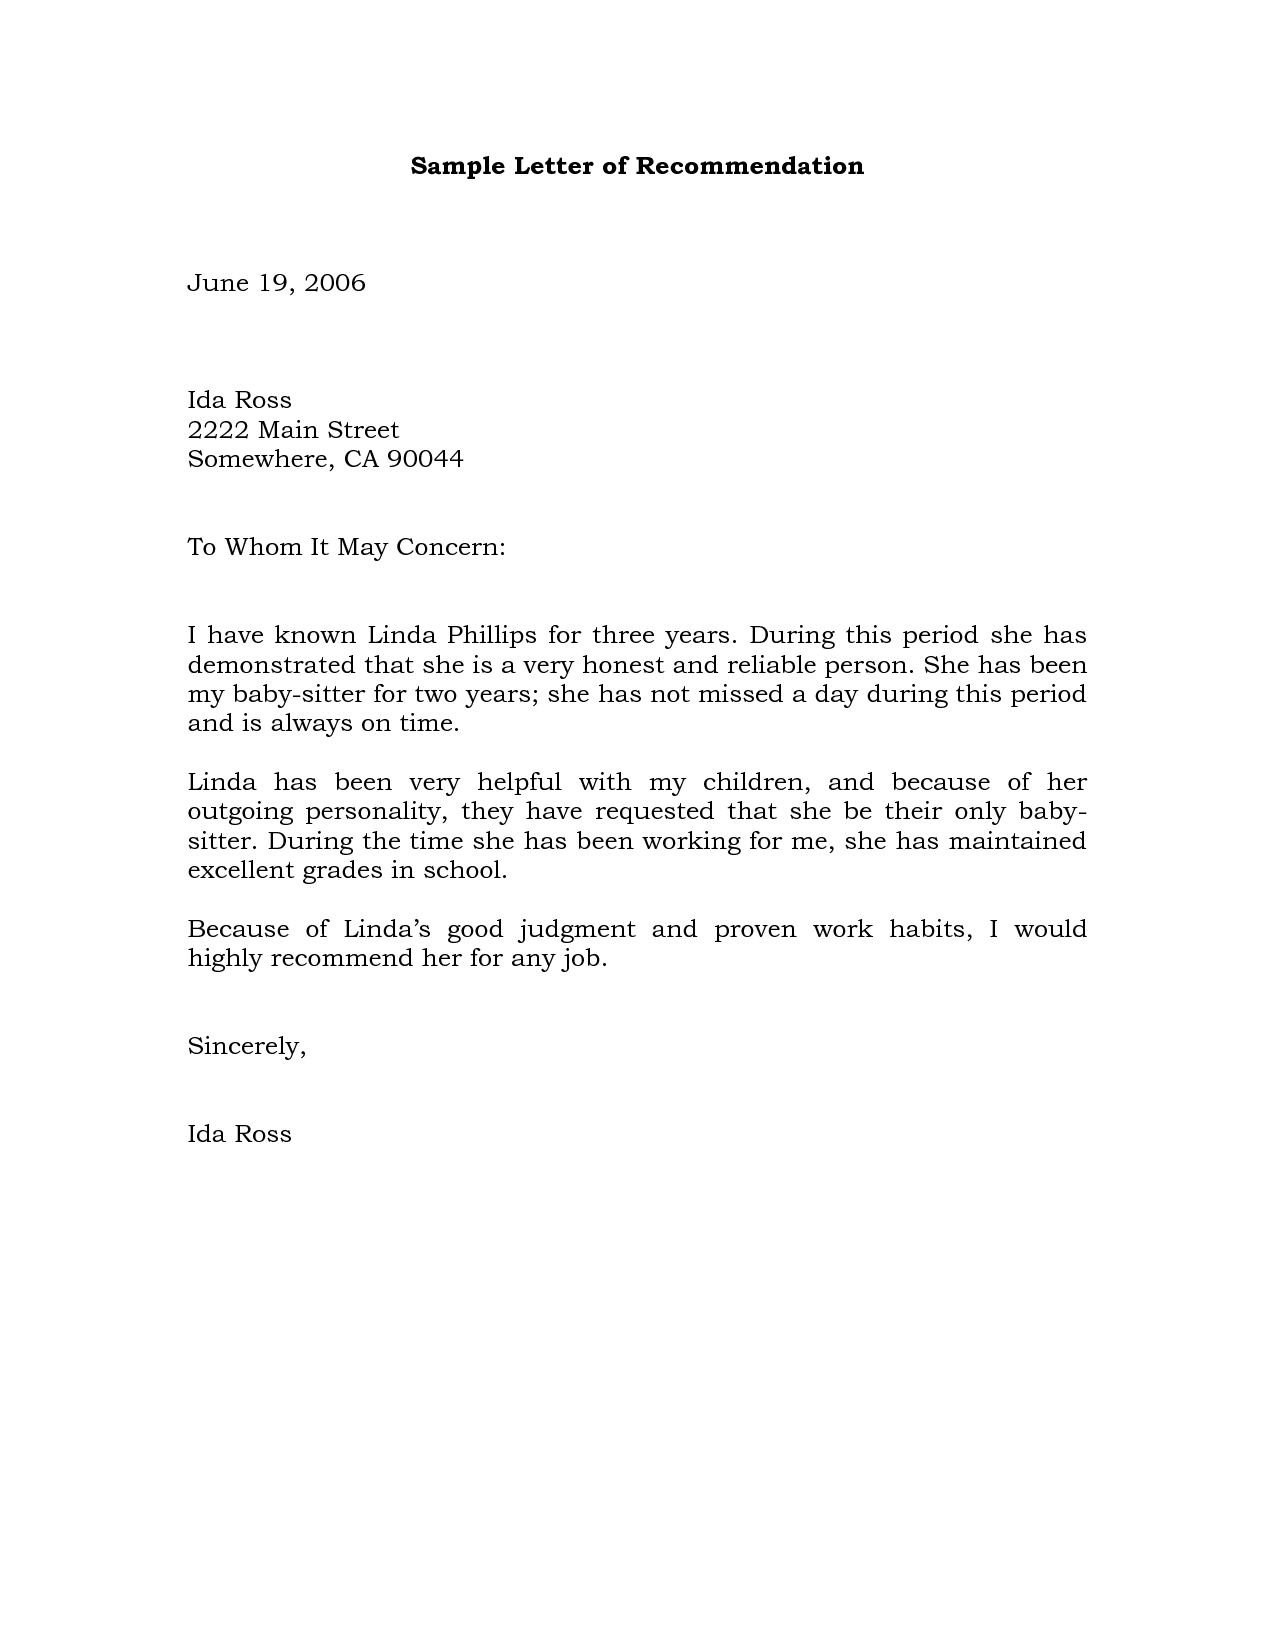 Vacation Rental Welcome Letter Template - Sample Re Mendation Letter Example Projects to Try